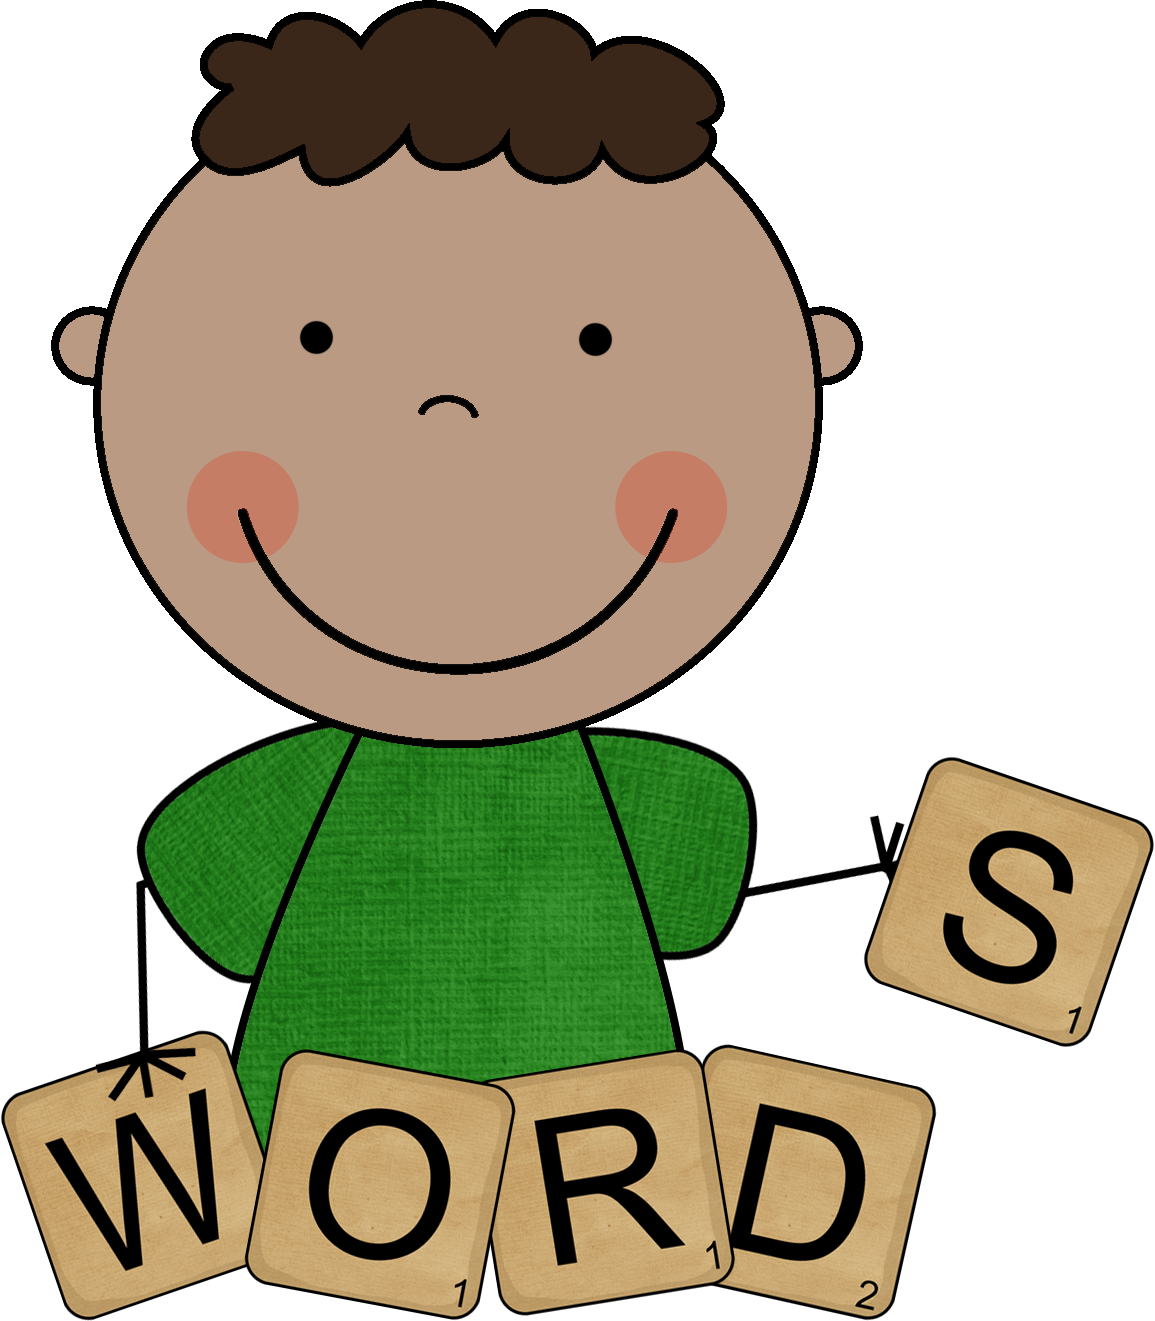 Vocabulary drawing at getdrawings. Words clipart fact